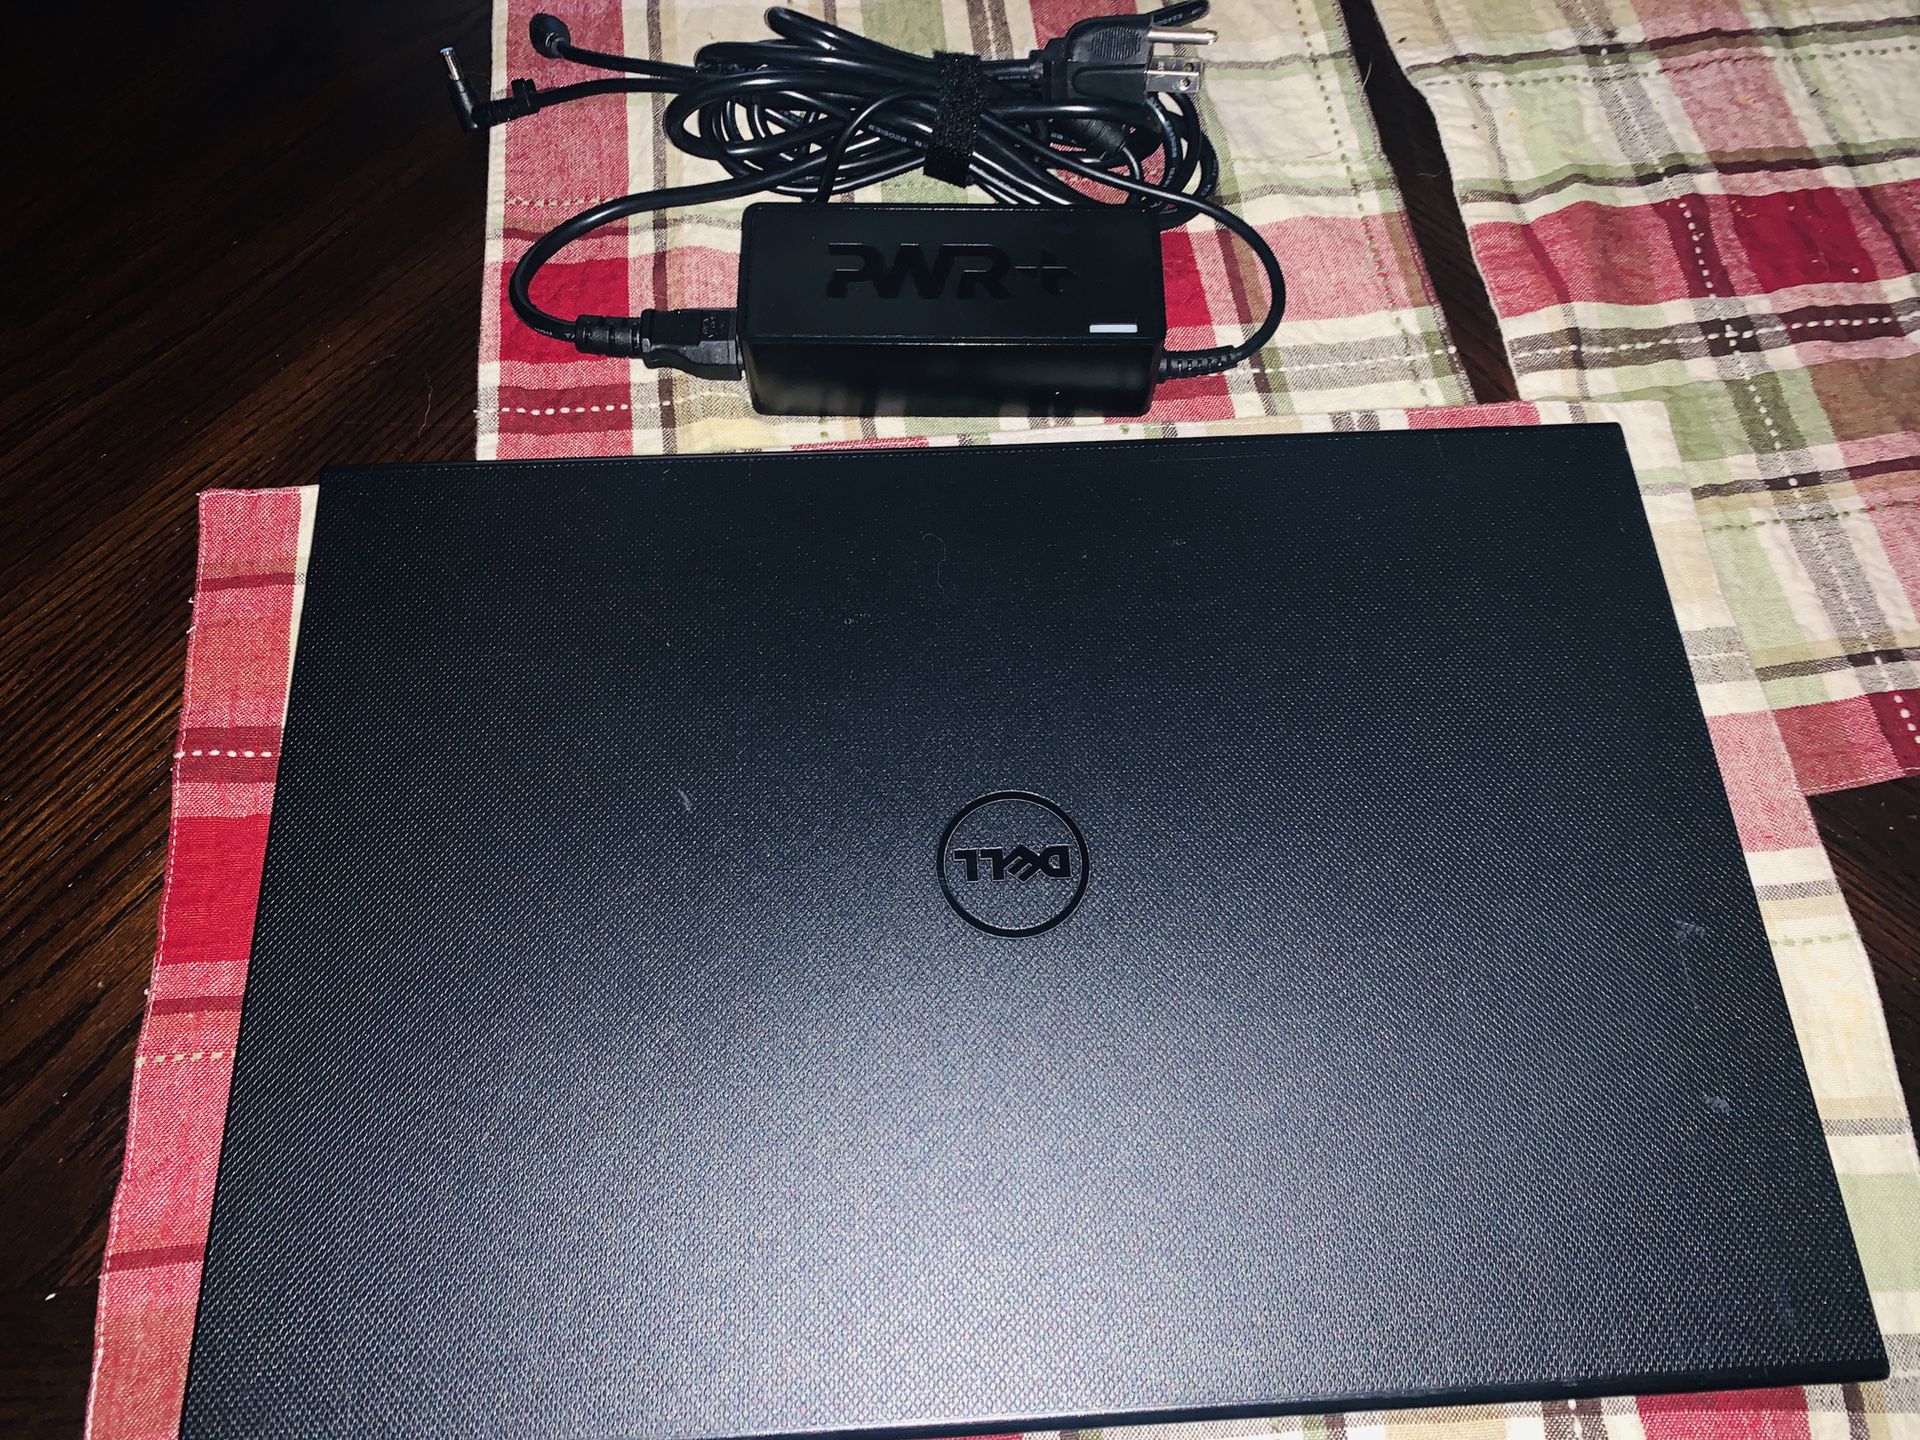 Dell Inspiron 15 w/ 120GB SSD, 8GB RAM, Windows 10 Pro, Office 2019 Pro, Laptop backpack, and more!